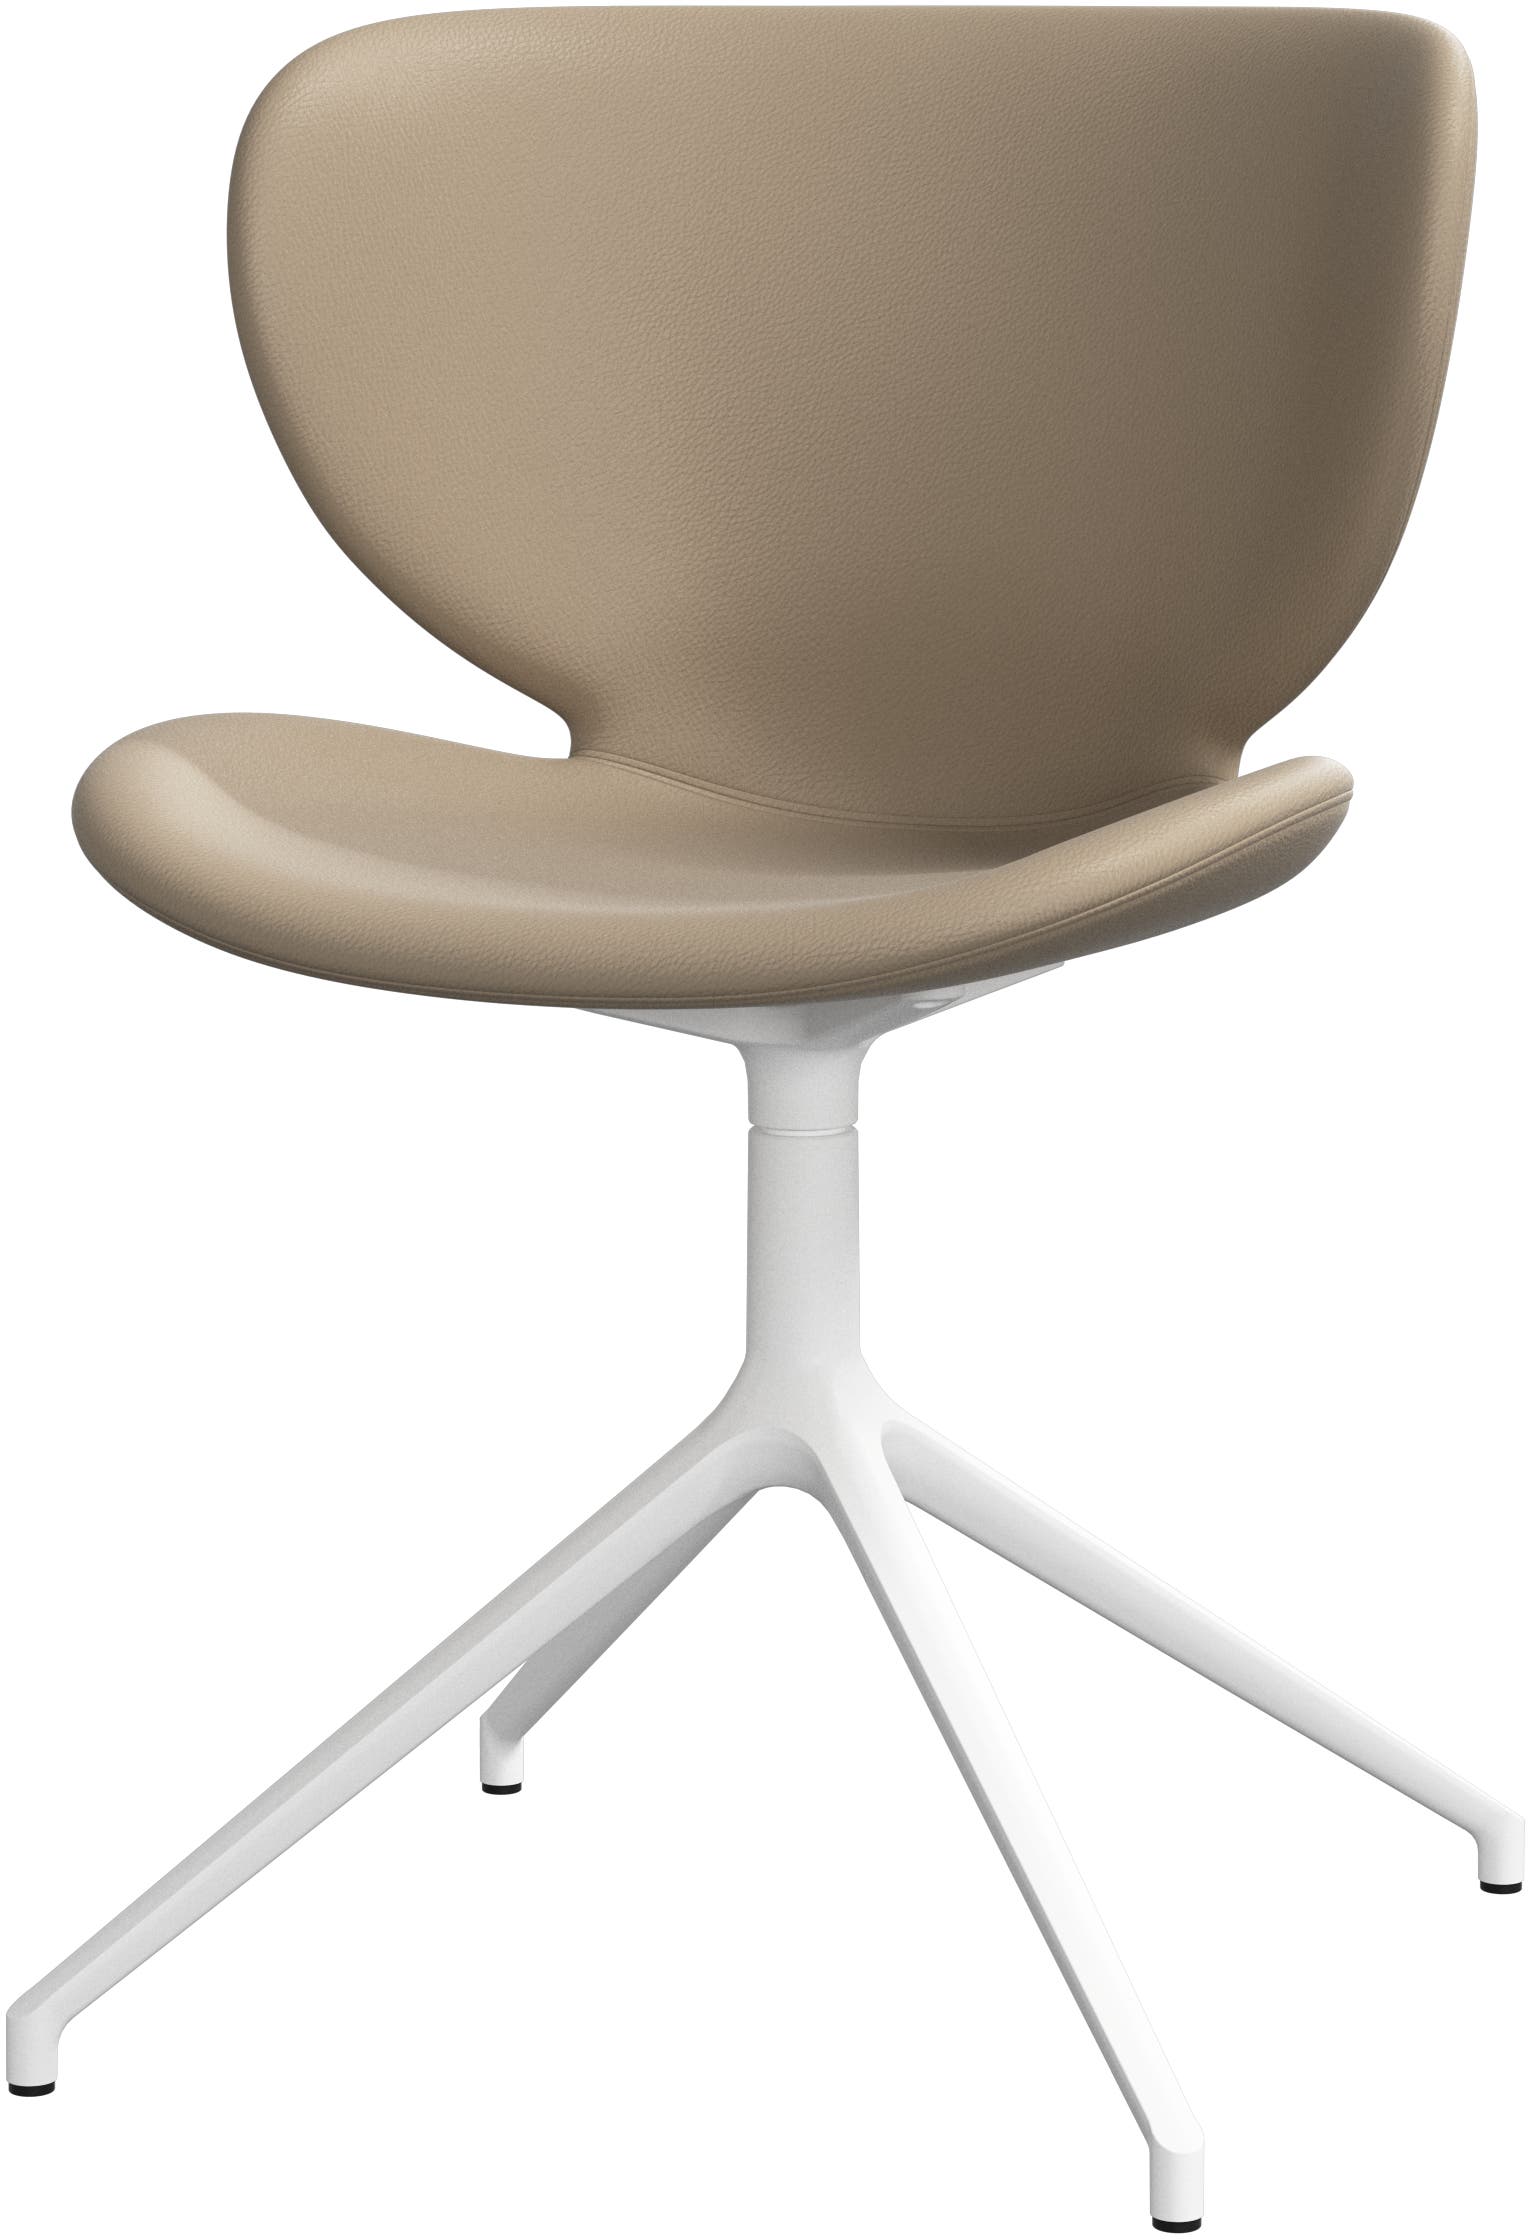 Hamilton chair with swivel function